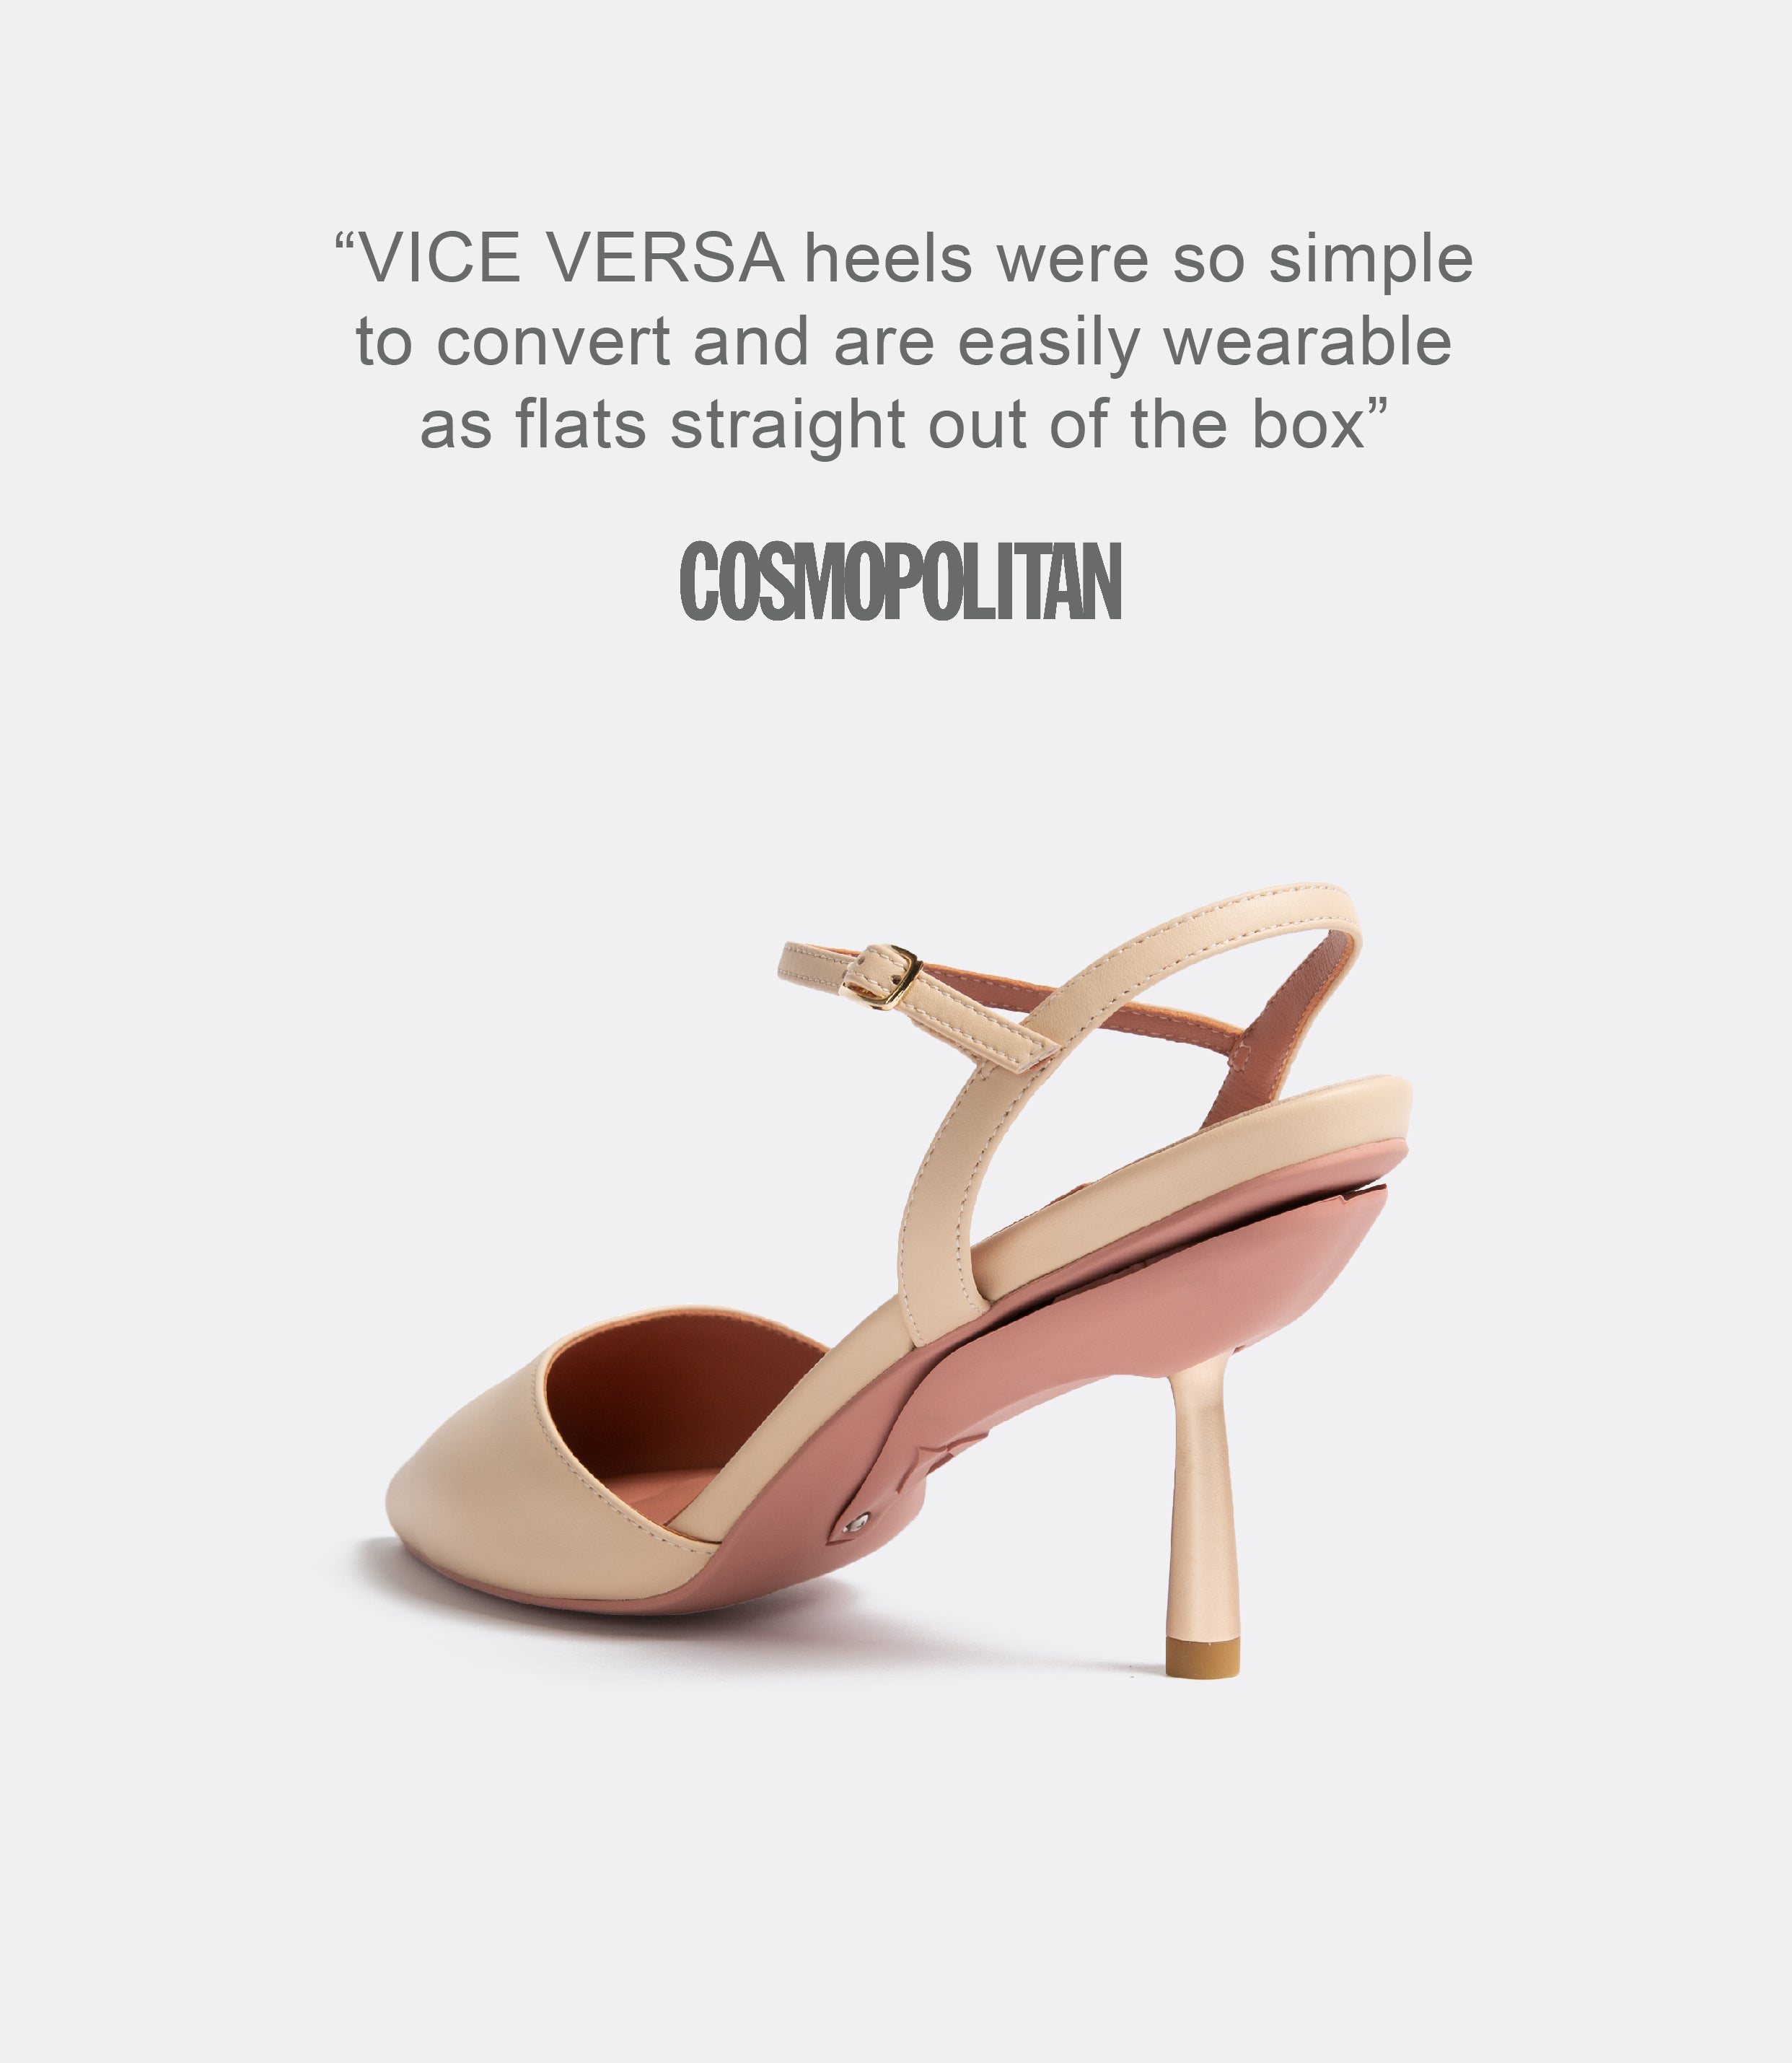 A quote from Cosmopolitan and a back view of a beige leather heel.